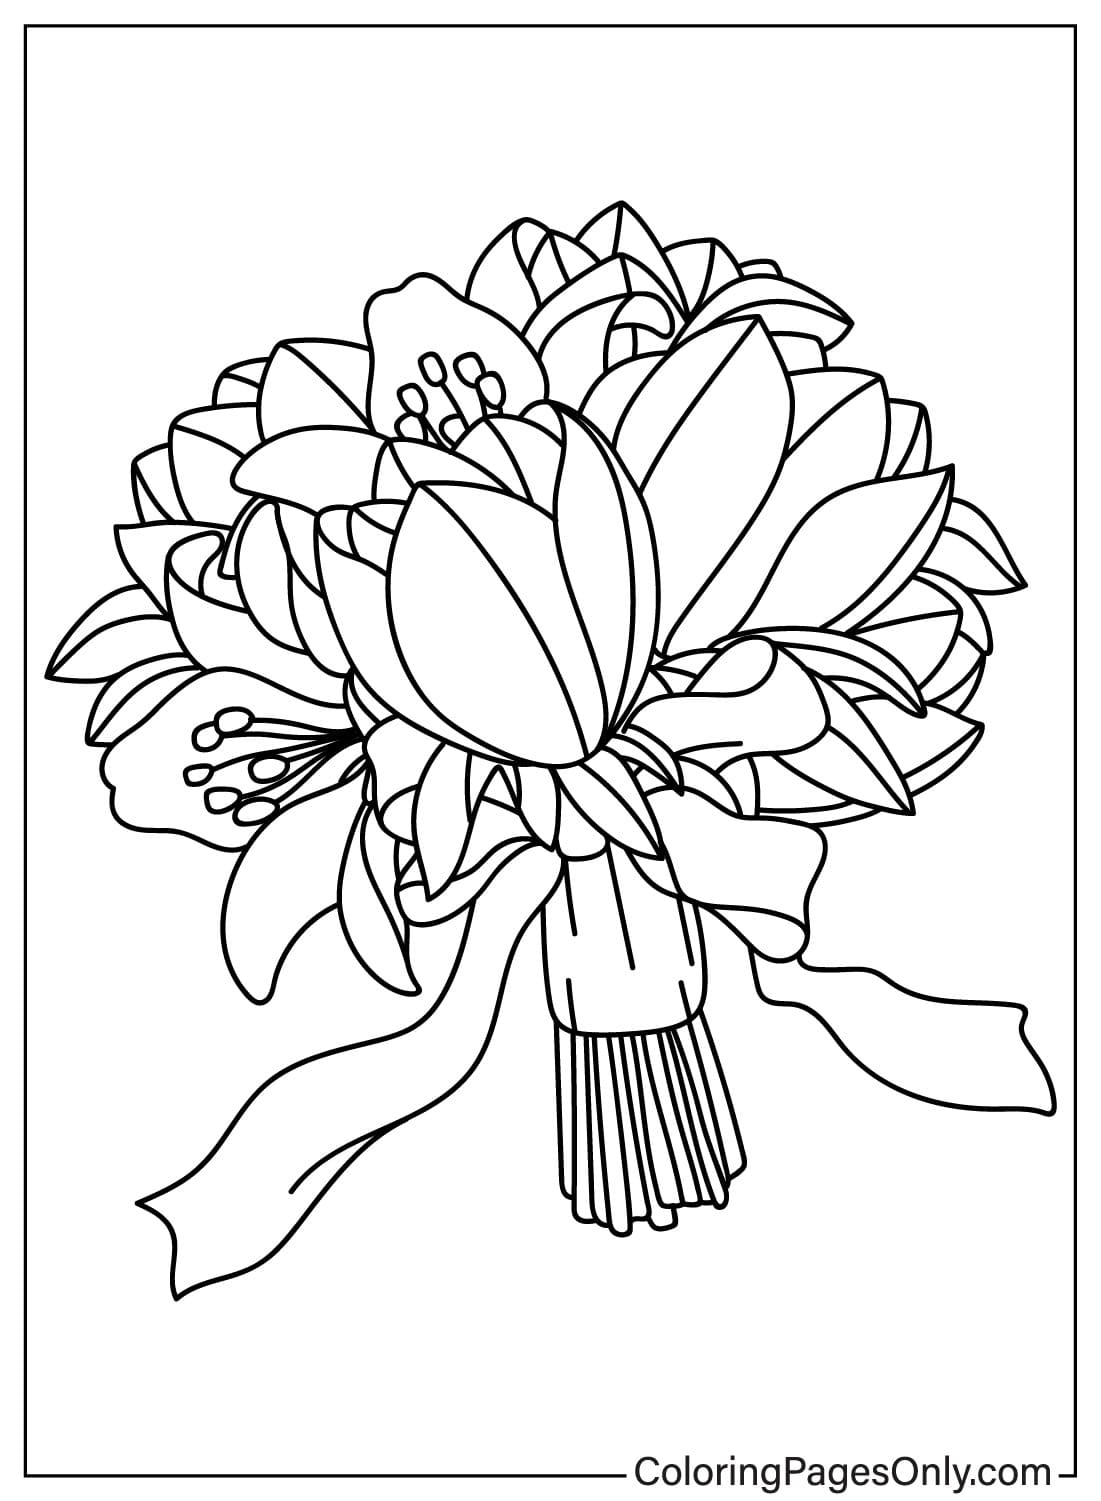 Color Page Flower Bouquet from Flower Bouquet